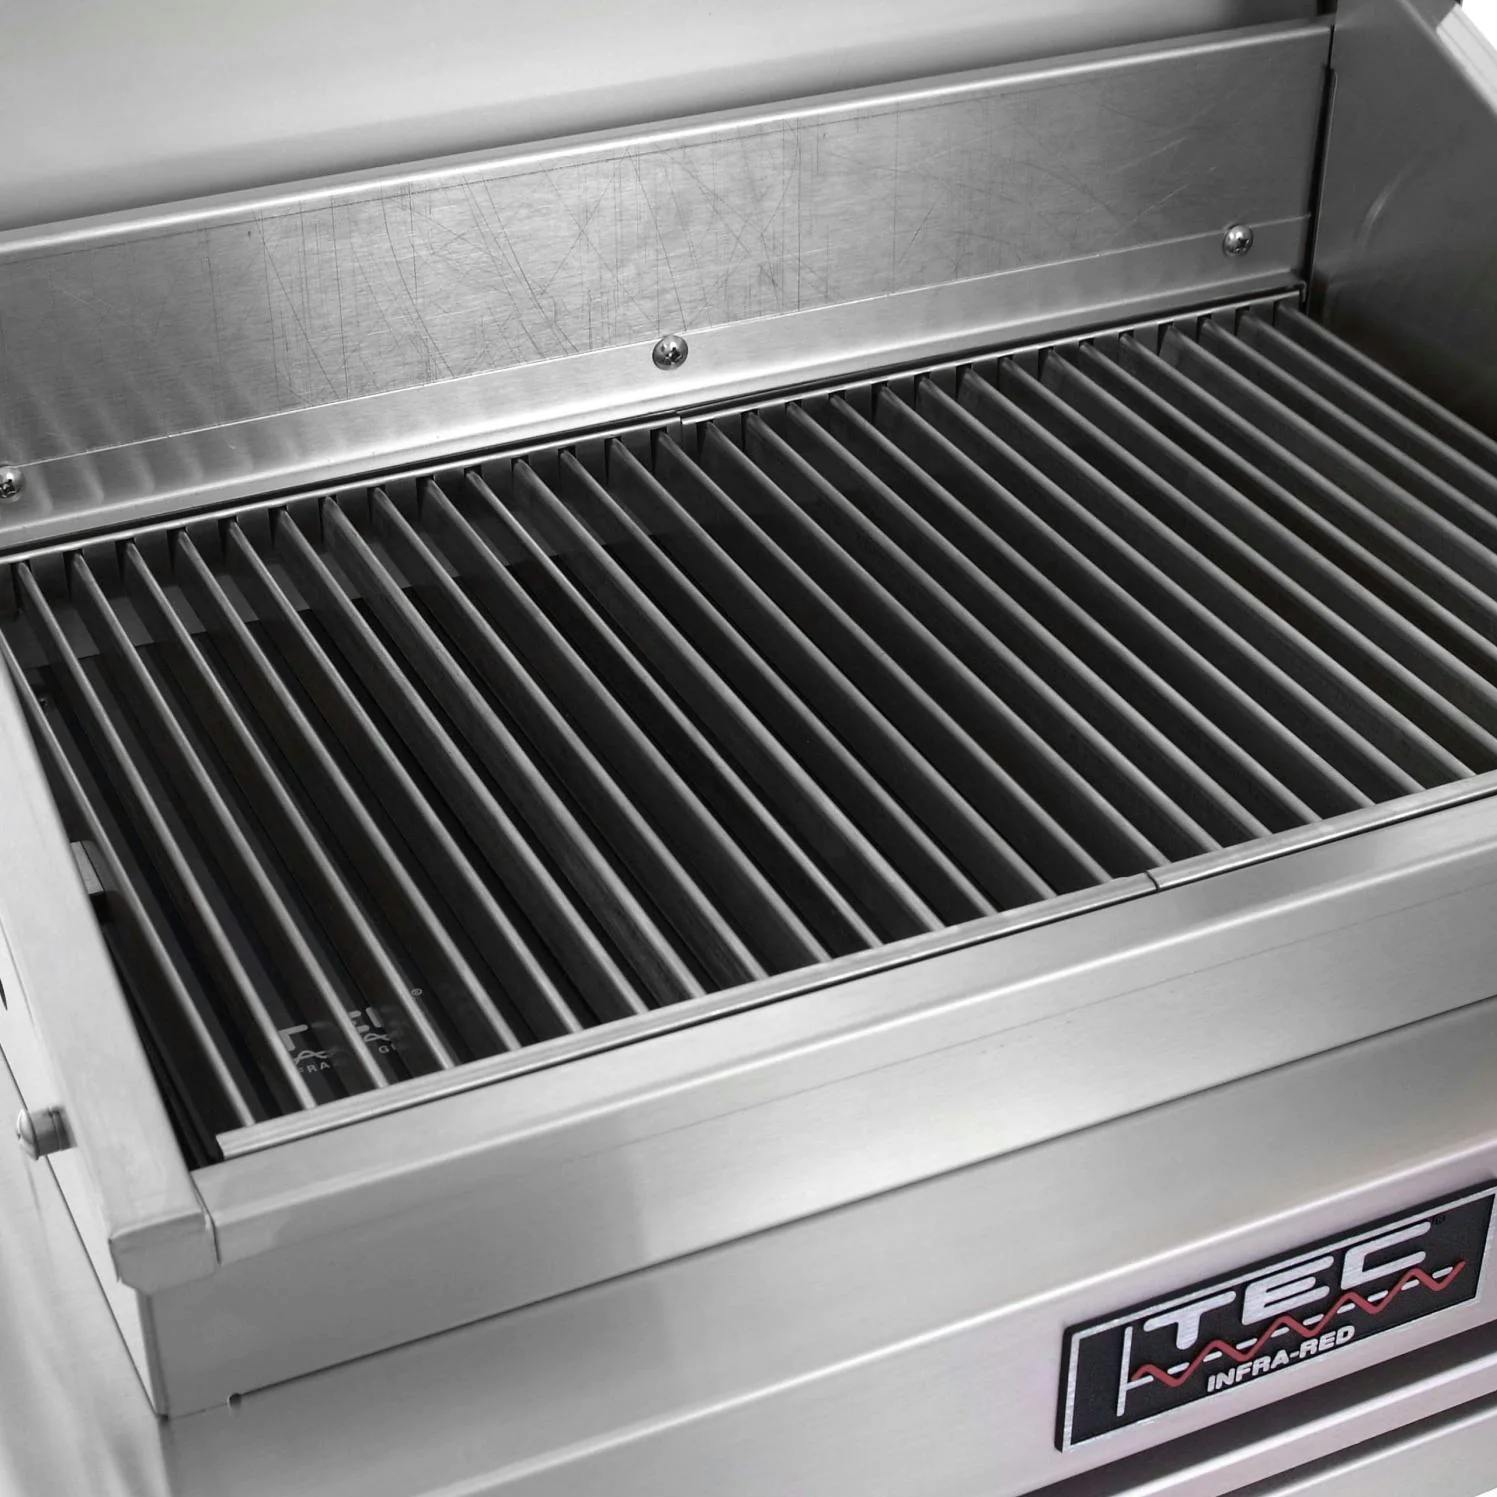 TEC G-Sport FR Portable Infrared Gas Grill